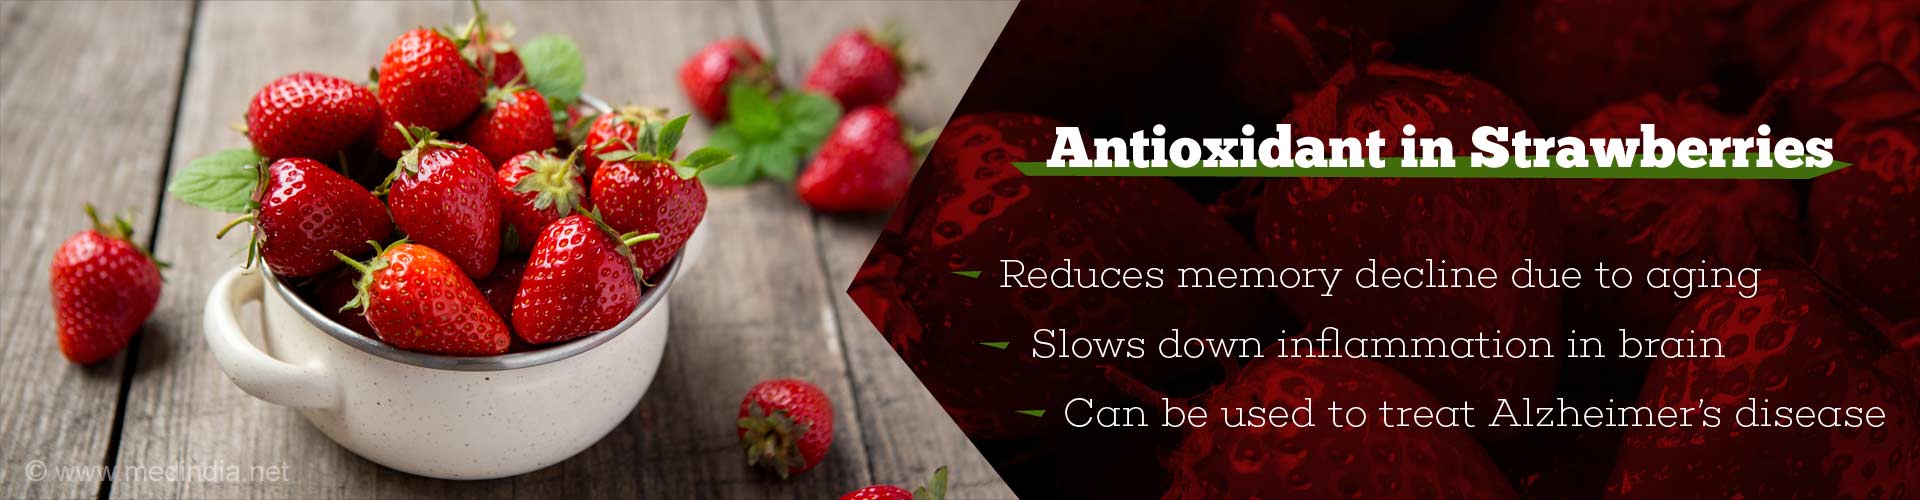 antioxidant in strawberries
- reduces memory decline due to aging
- slows down inflammation in brain
- can be used to treat Alzheimer's disease